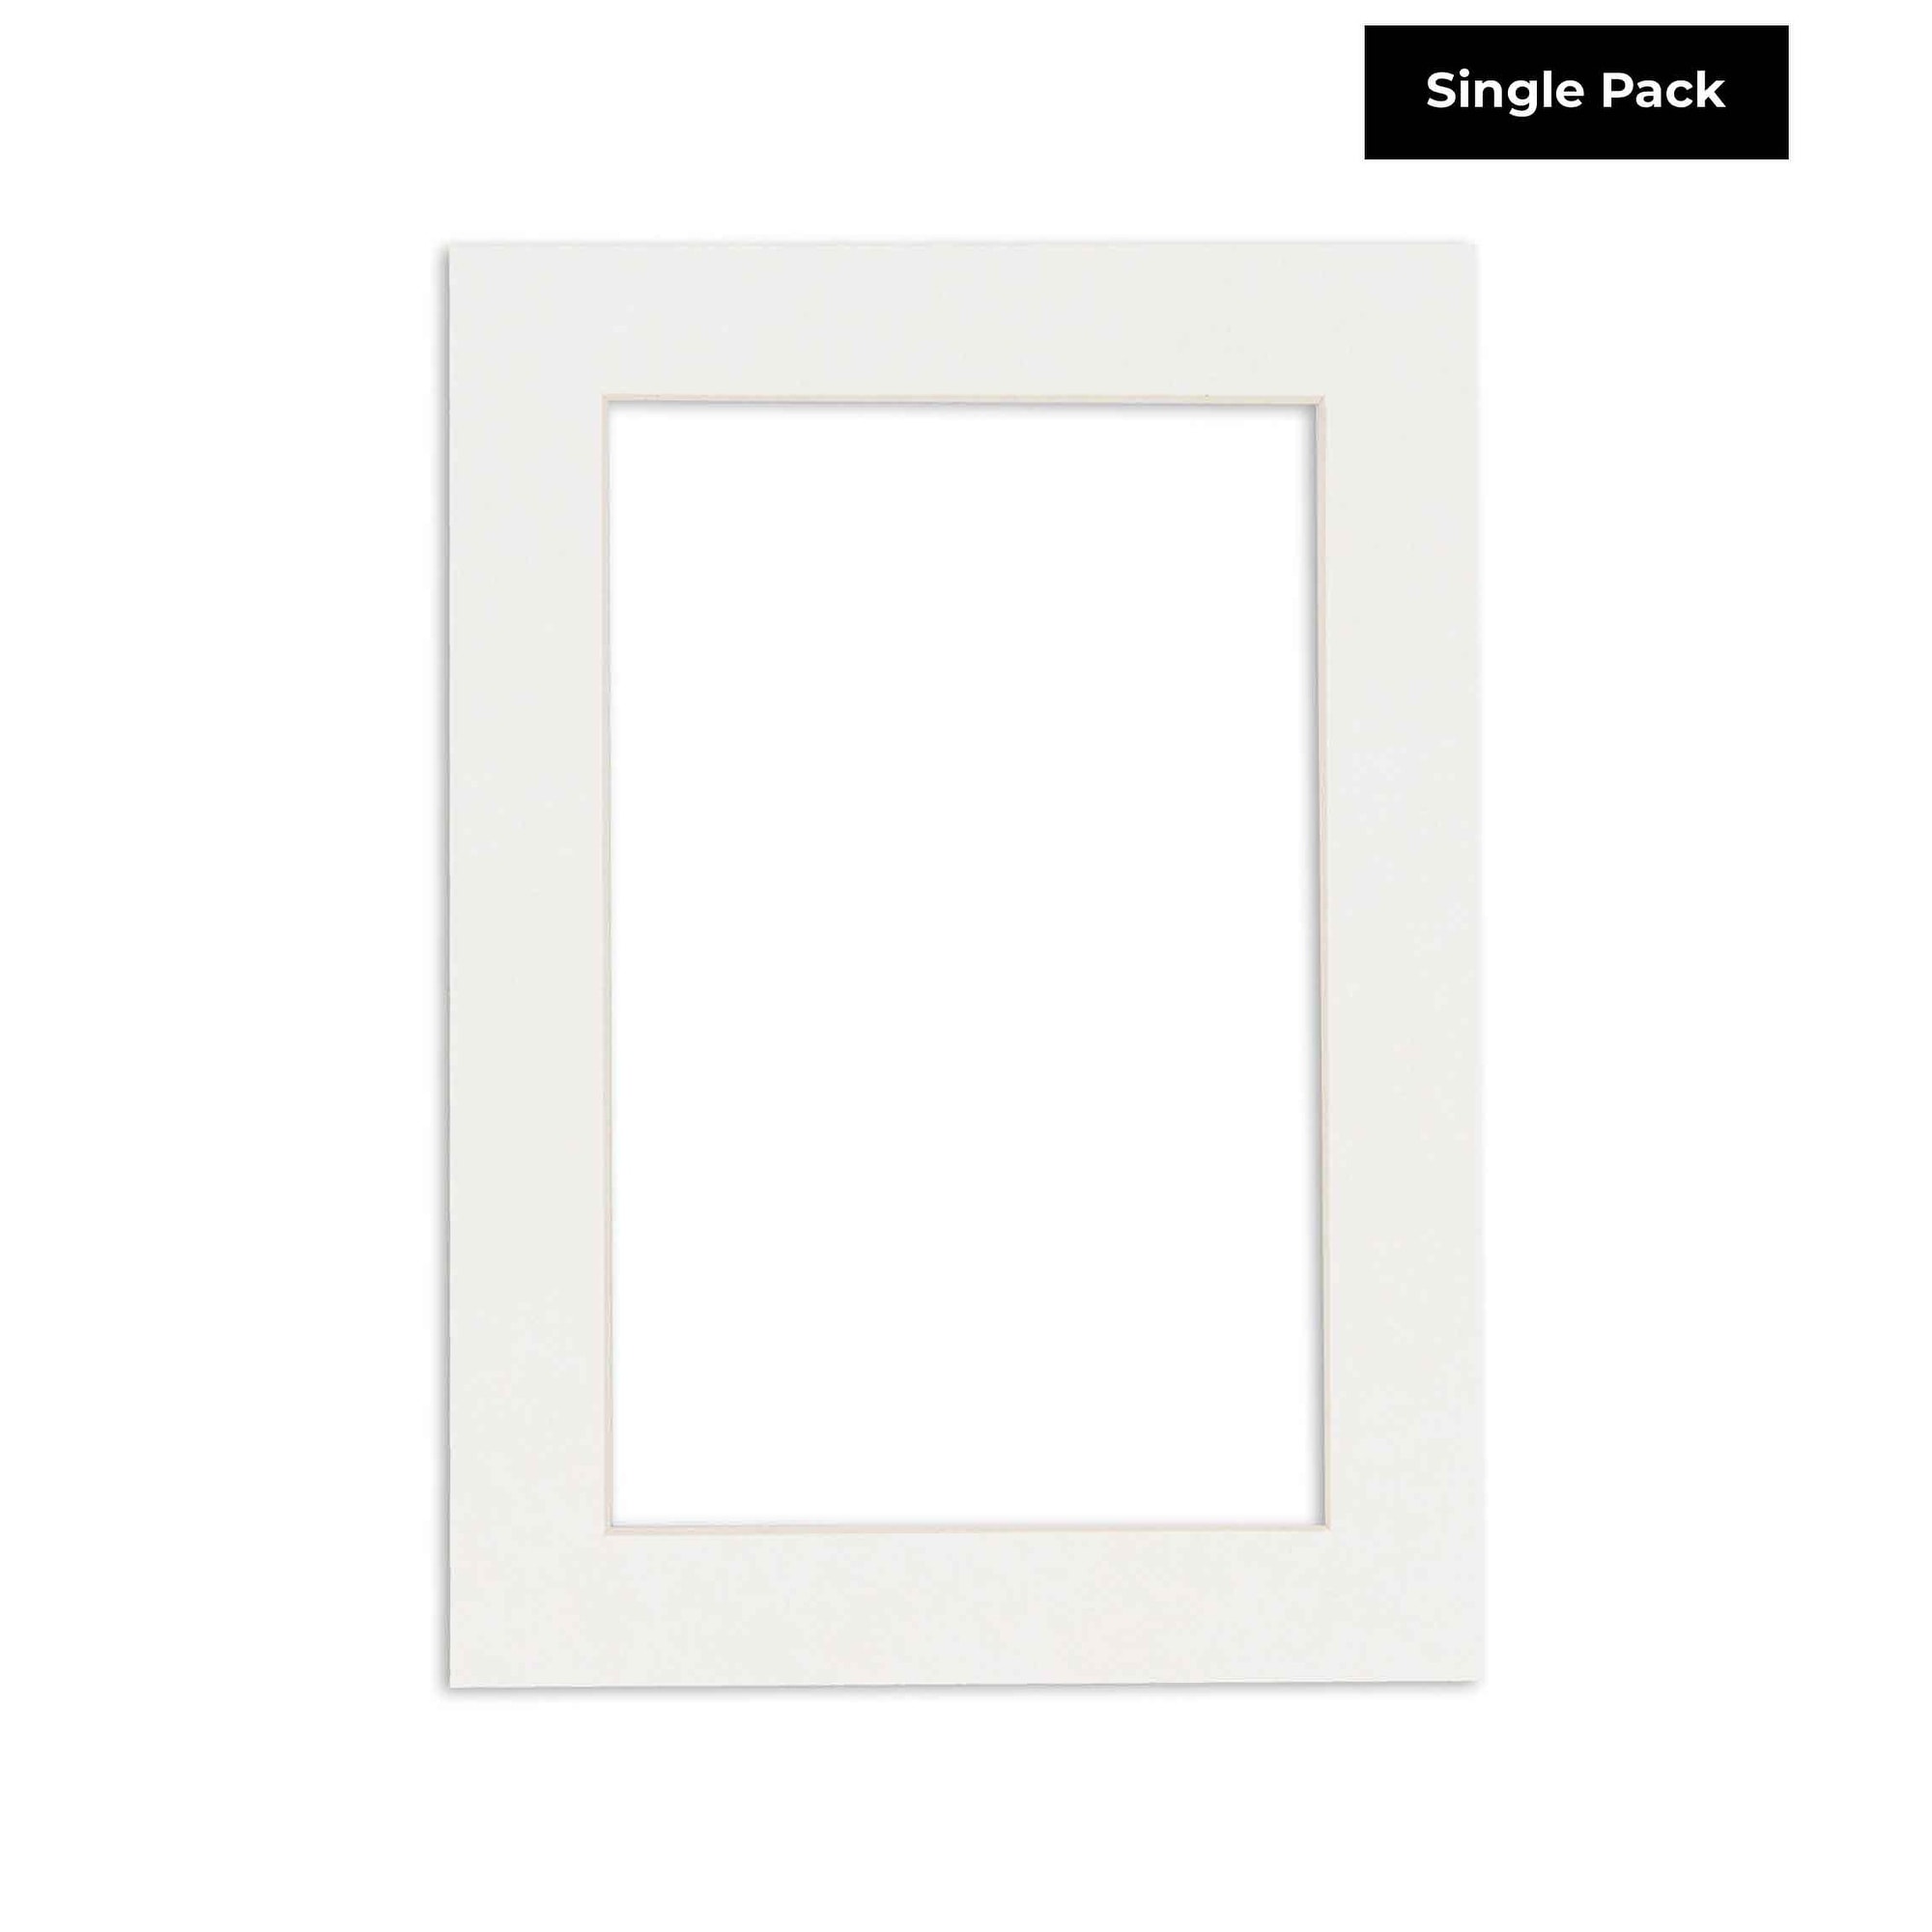 11x14 Mat Bevel Cut for 9x11 Photos - Acid Free Textured White Precut  Matboard - For Pictures, Photos, Framing - Bed Bath & Beyond - 38478696